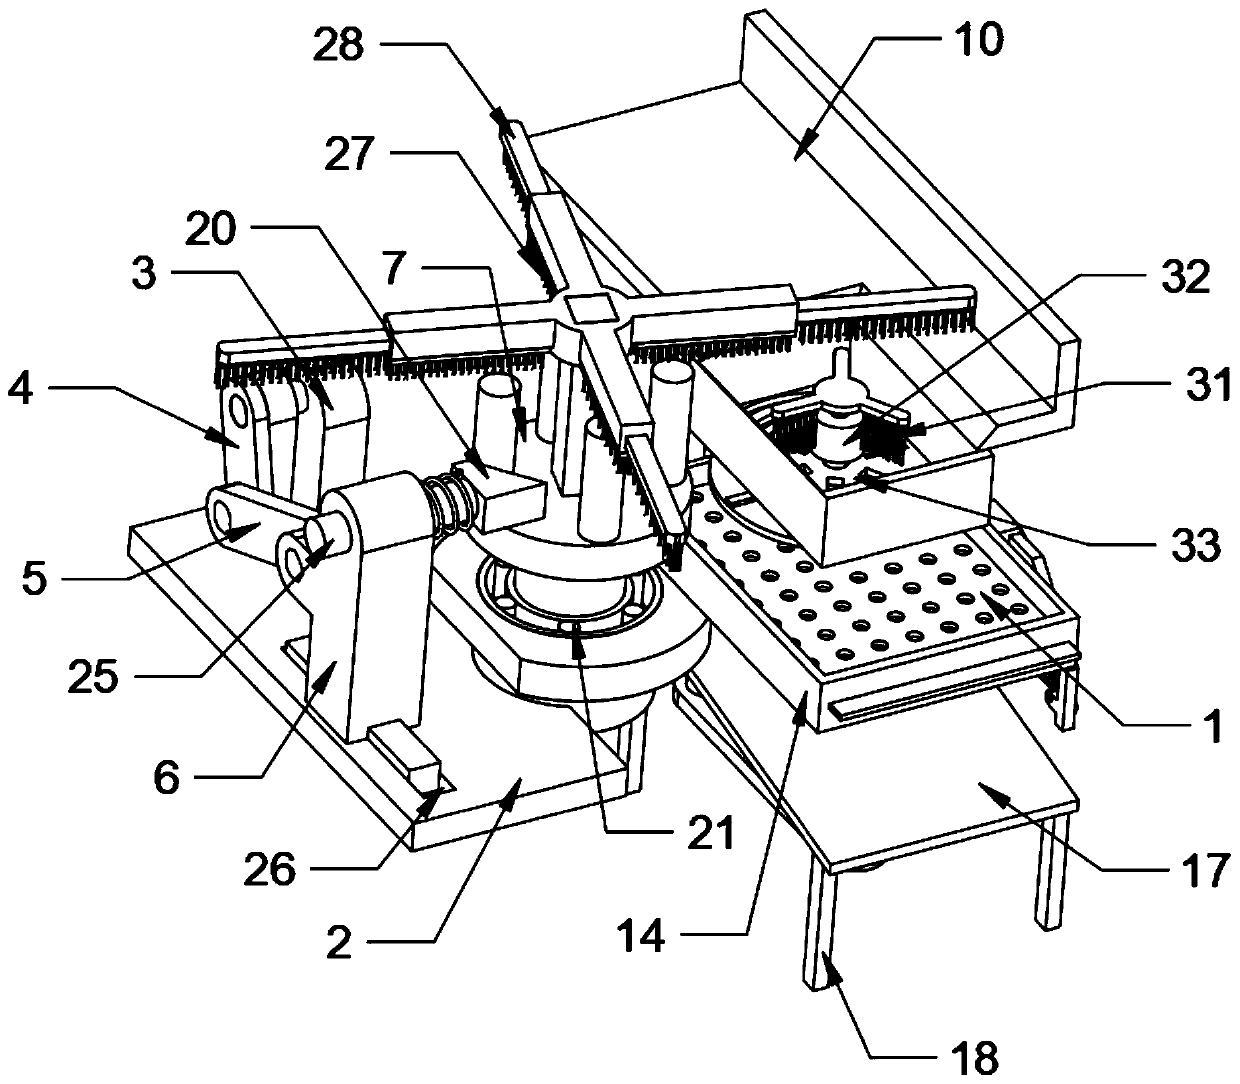 Automatic screening device for building gravel